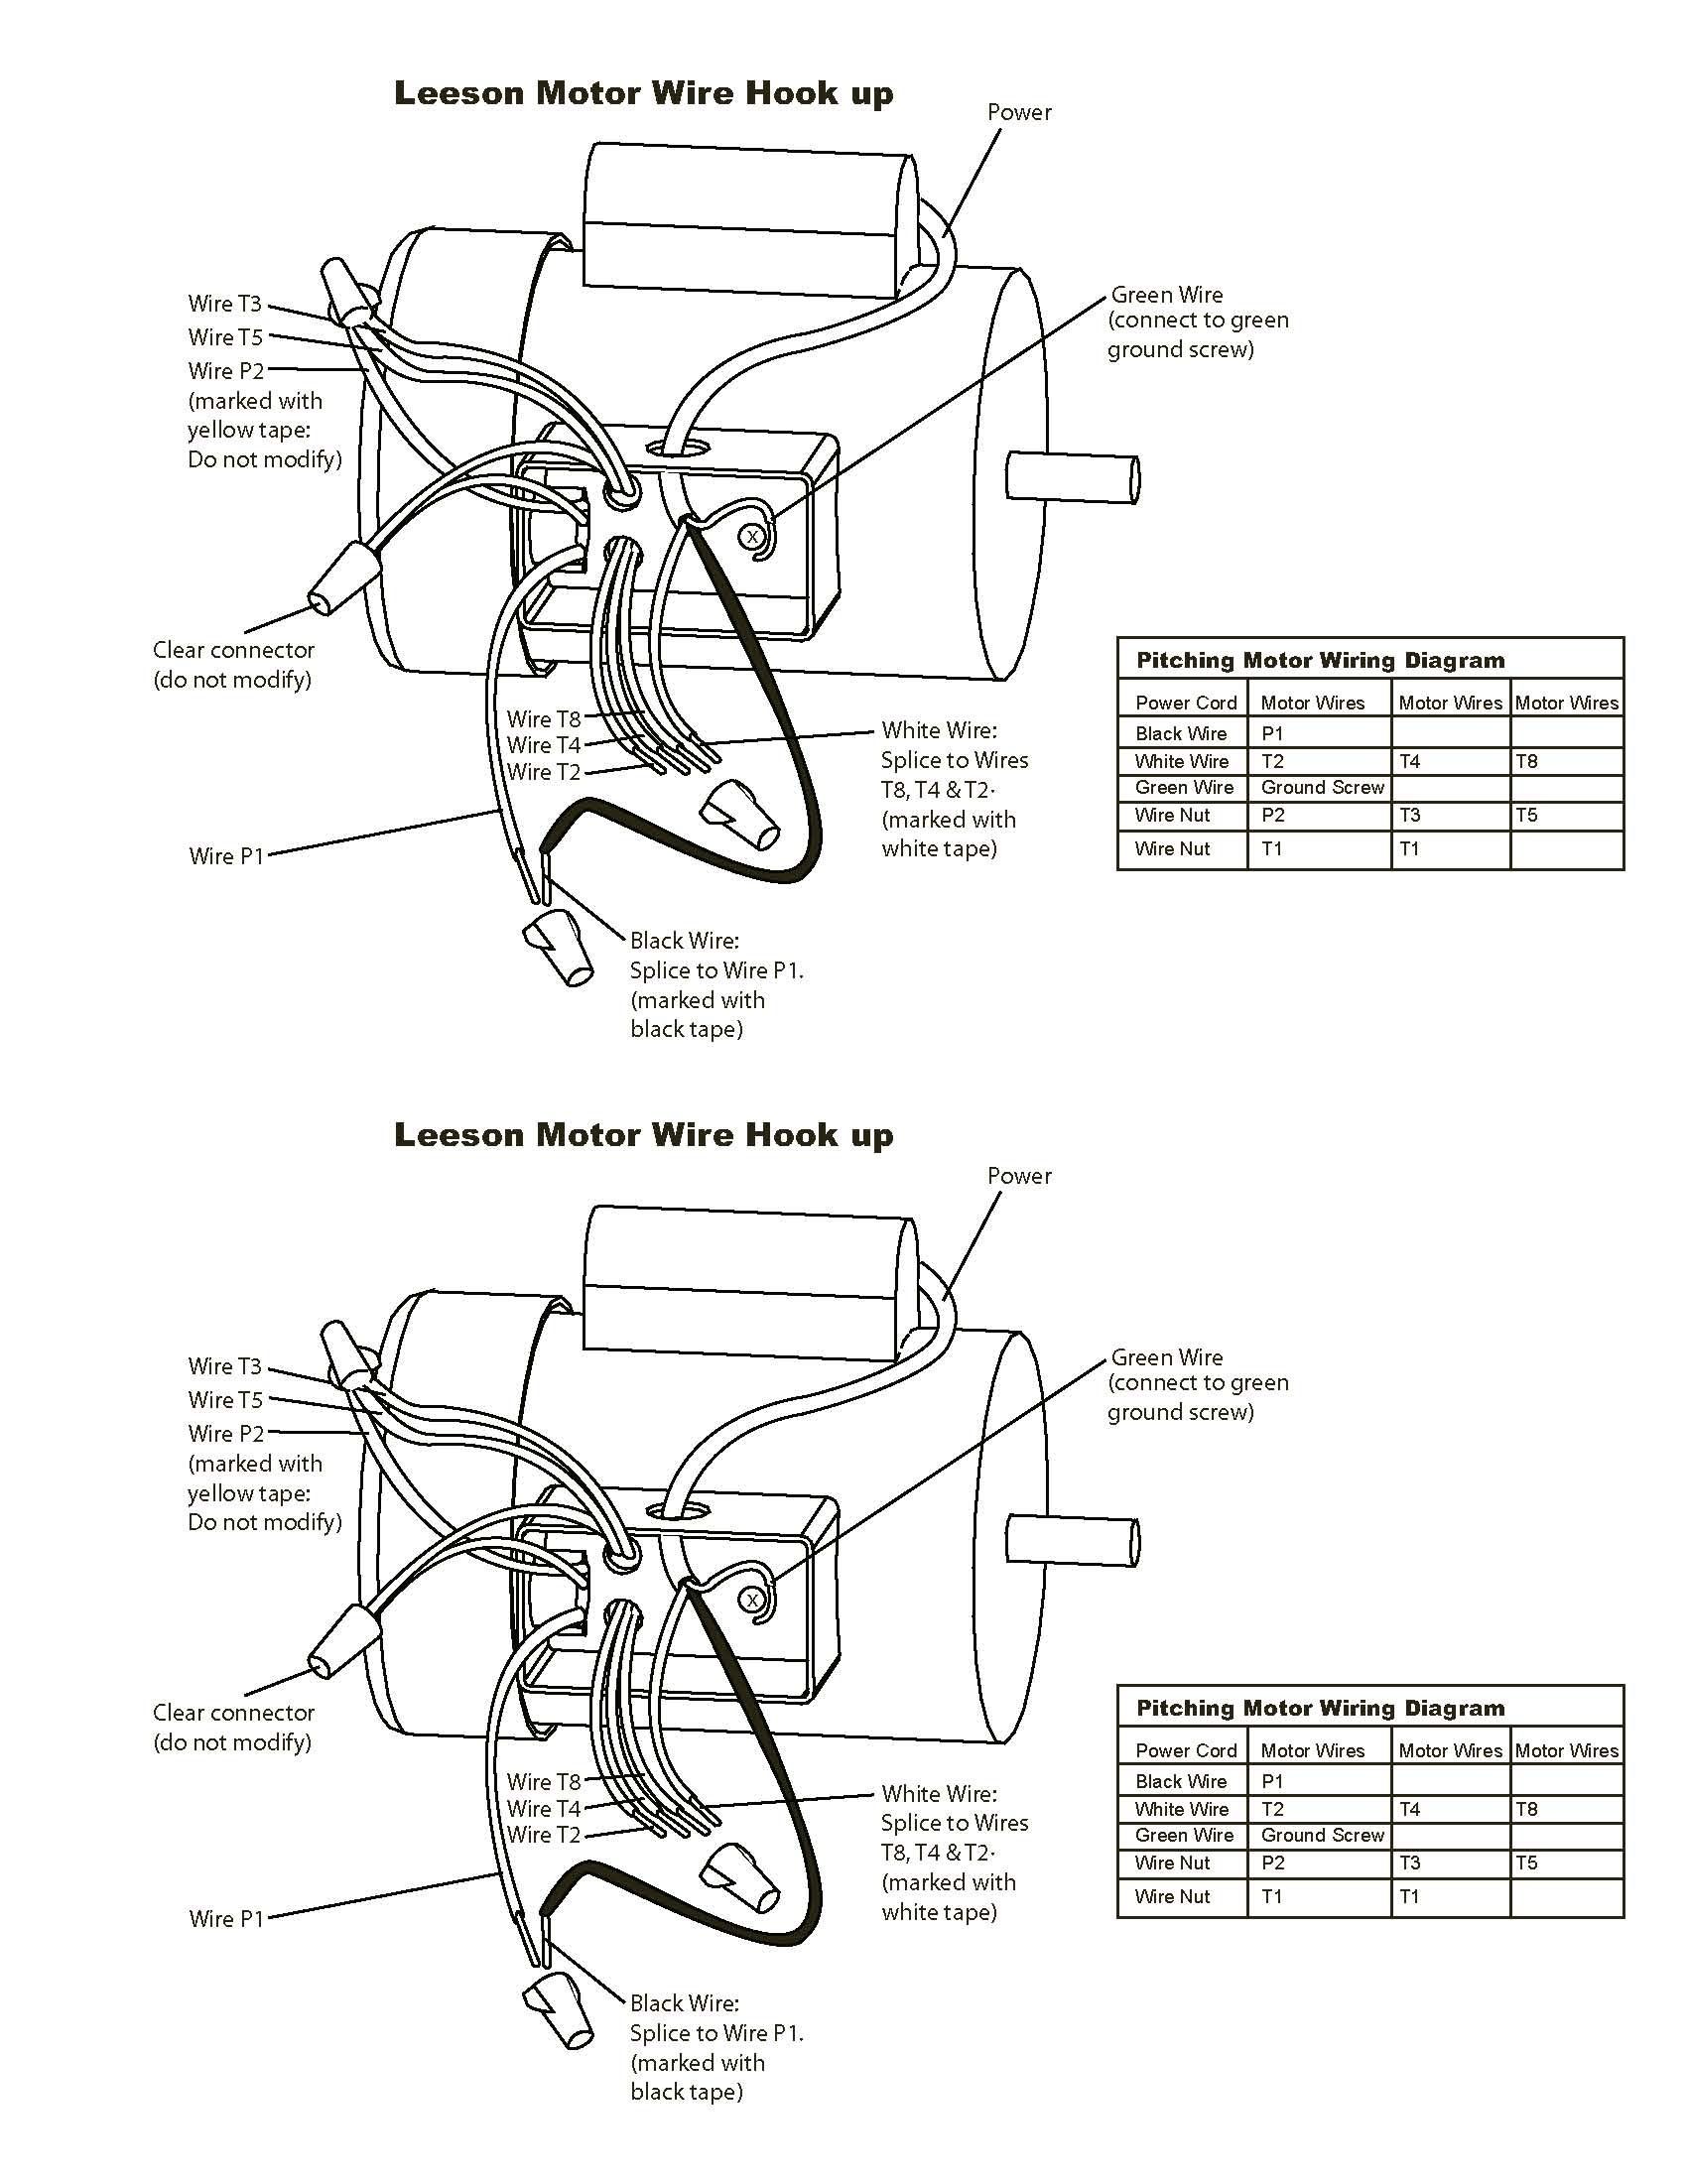 Moving Engine Diagram Abc Leeson Motor Wire Hook Up 17012201 Of Moving Engine Diagram